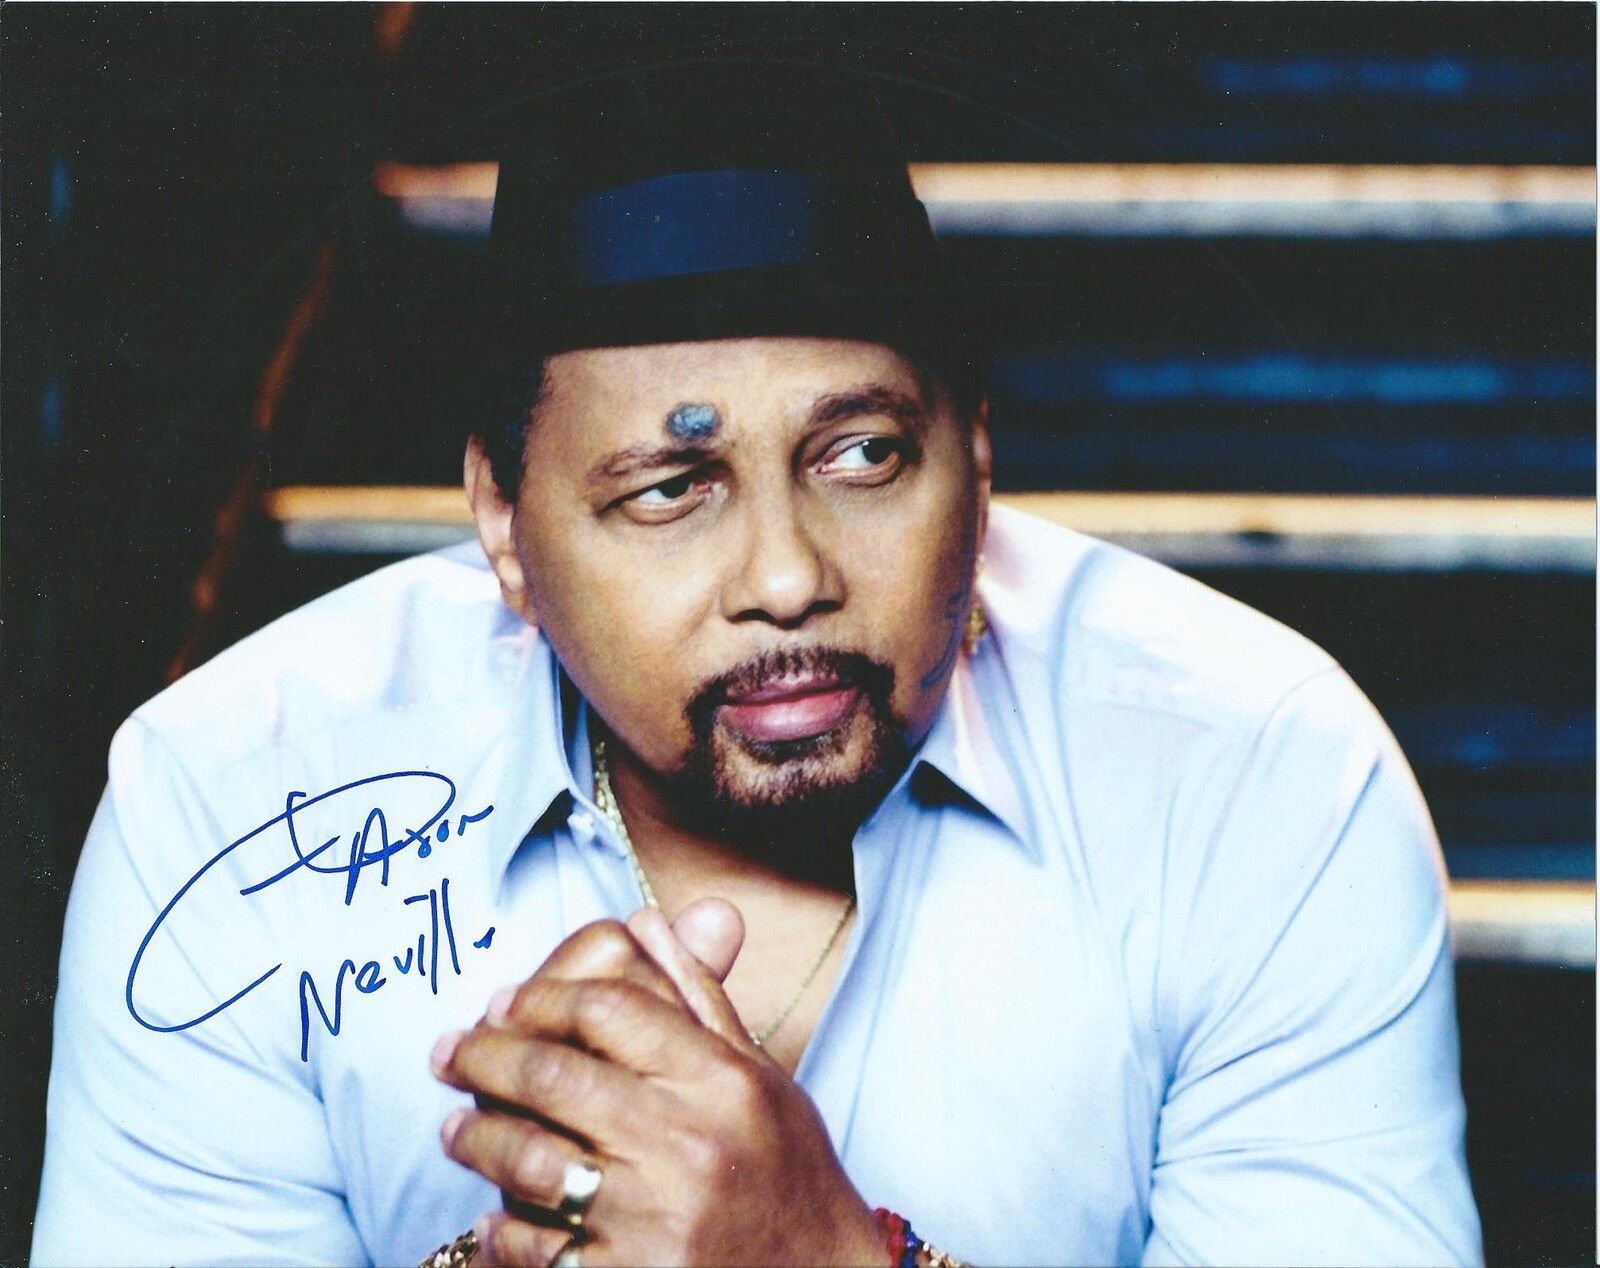 Aaron Neville *THE NEVILLE BROTHERS* Signed 8x10 Photo Poster painting AD6 COA GFA PROOF!